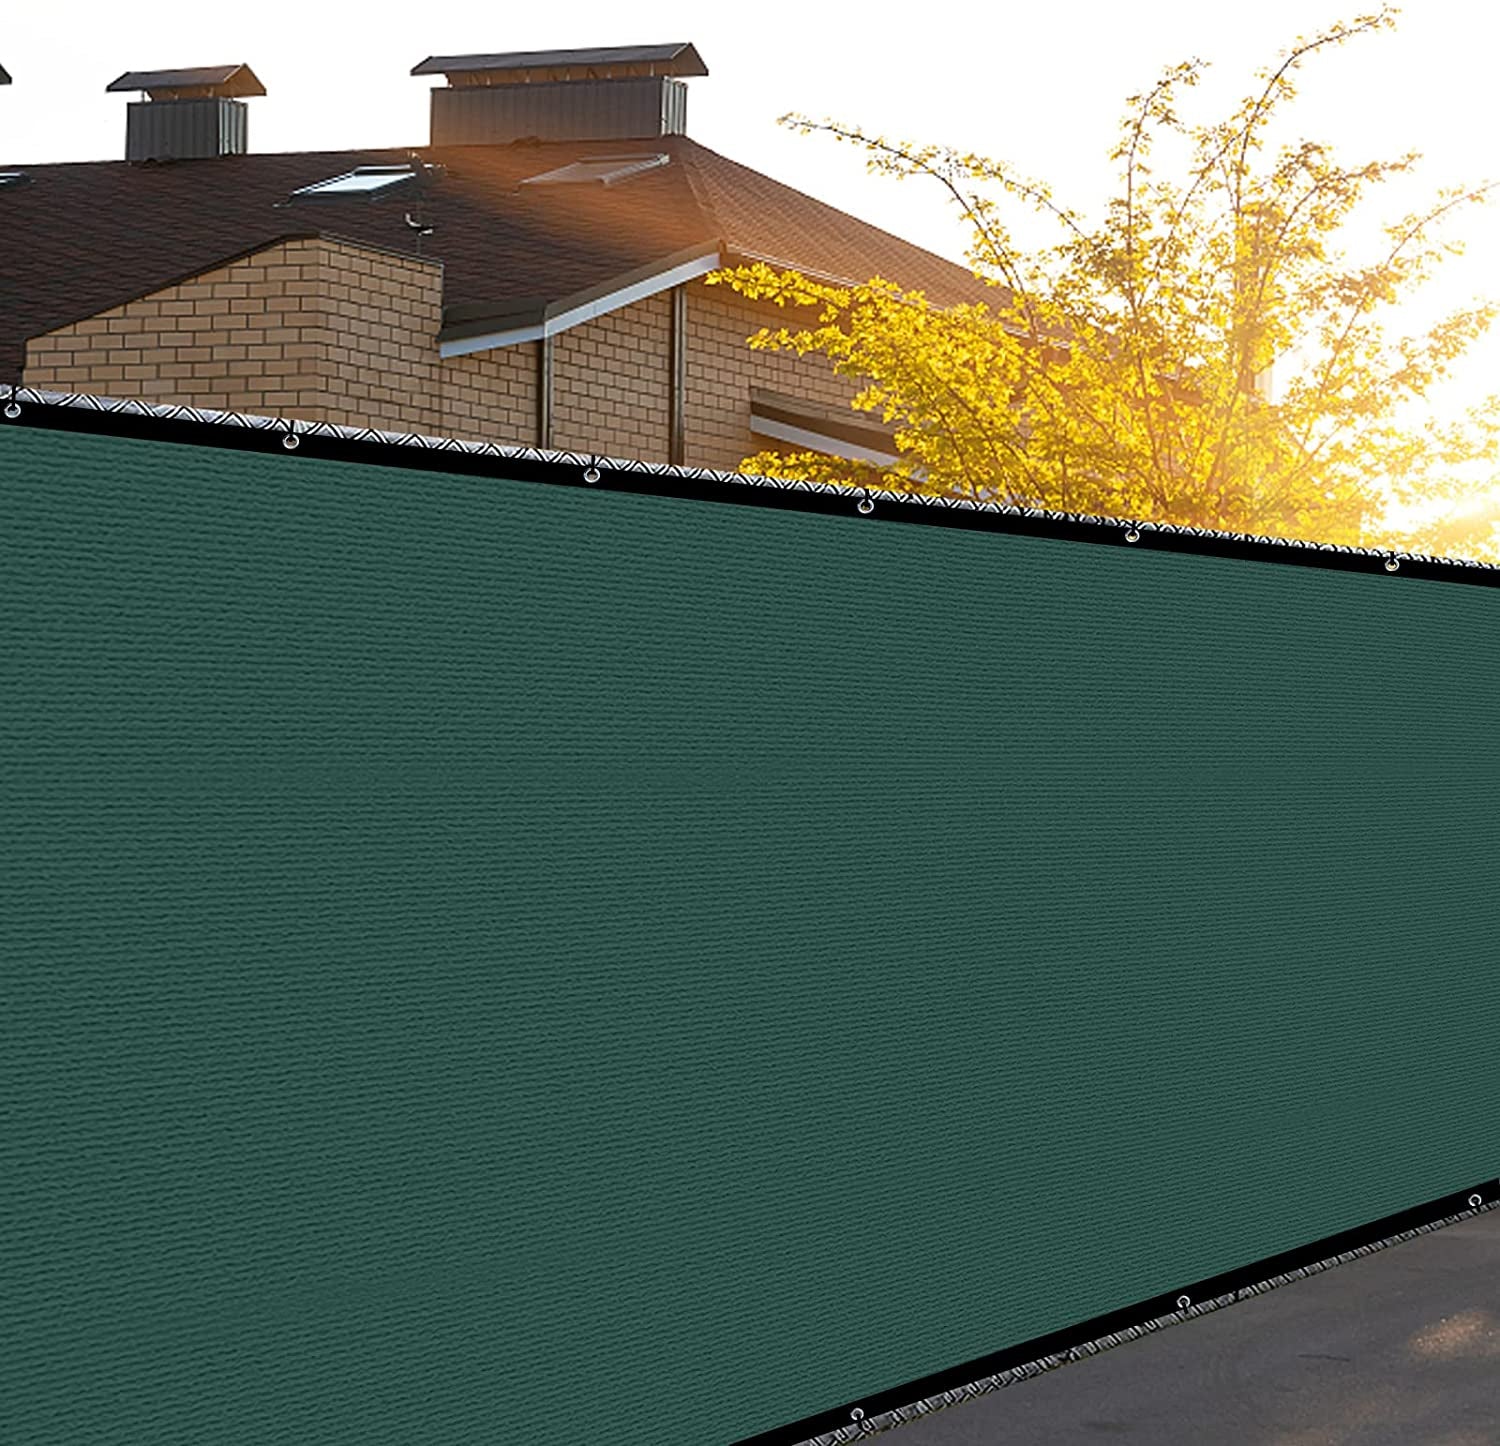 LOVE STORY, LOVE STORY 4'X50' Dark Green Fence Privacy Screen, Fence Covering Privacy of 90% Shade Rating - HDPE Shade Fabric Mesh Cover Heavy Duty for Chain Link Outdoor Fence, Patio, Wall Garden